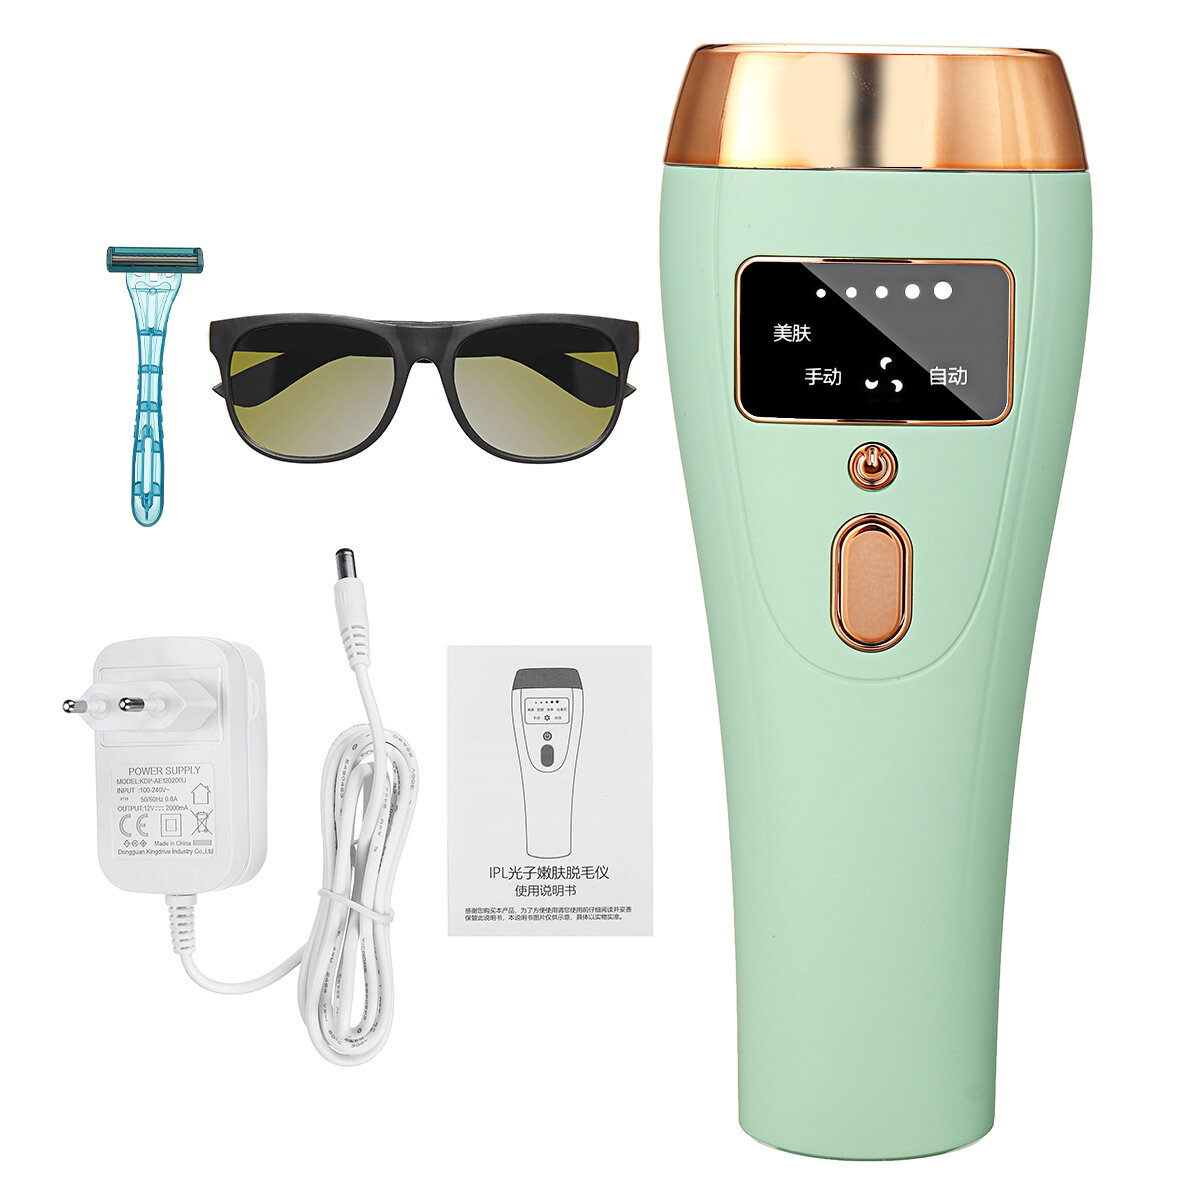 

999,999 Flashes IPL LCD Permanent Hair Removal Device 5 Modes Laser Painless Epilator